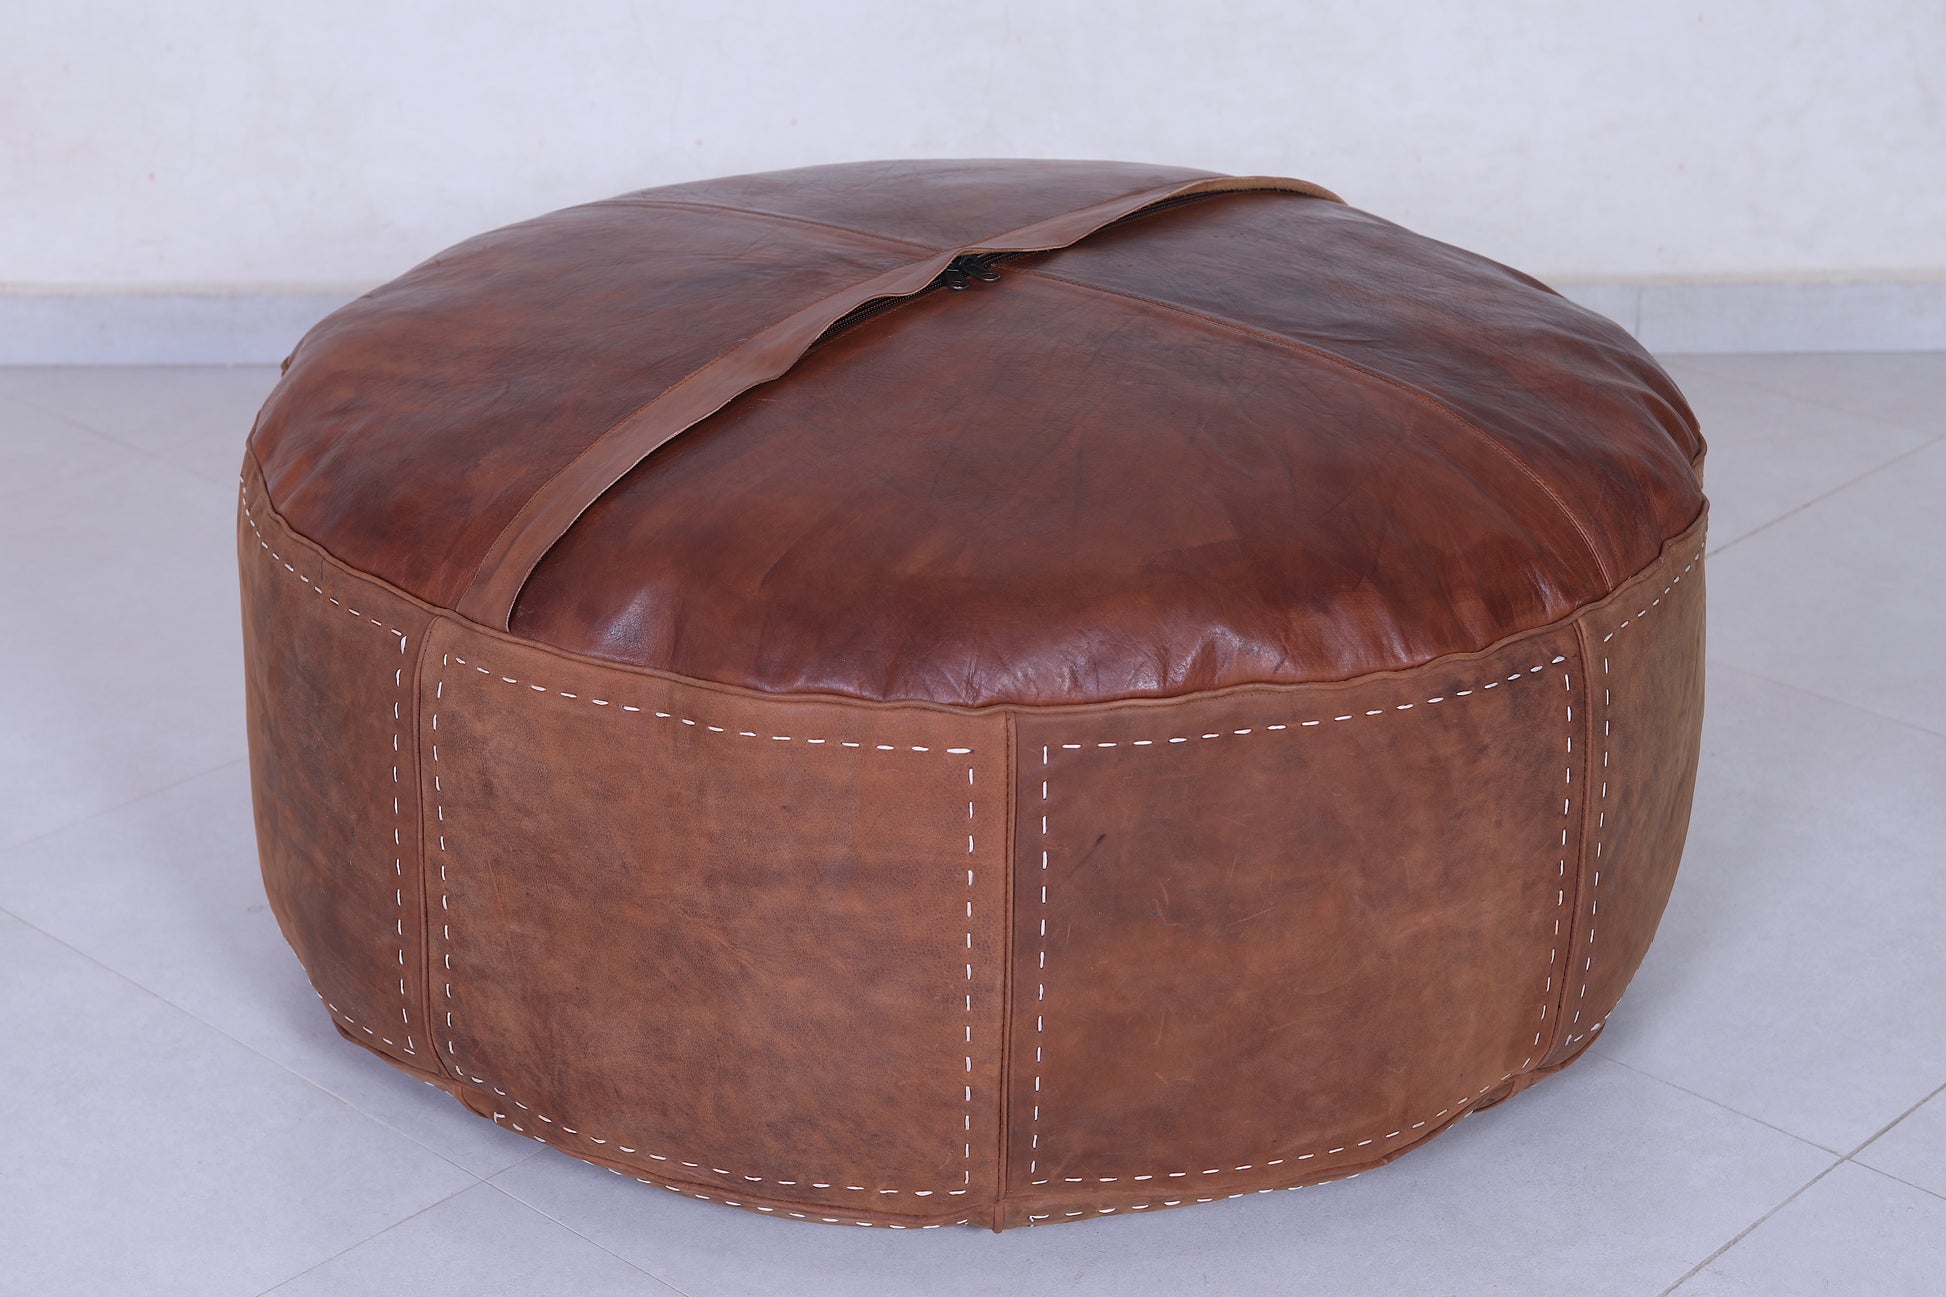 Moroccan Leather Pouf Chestnut – Berberb